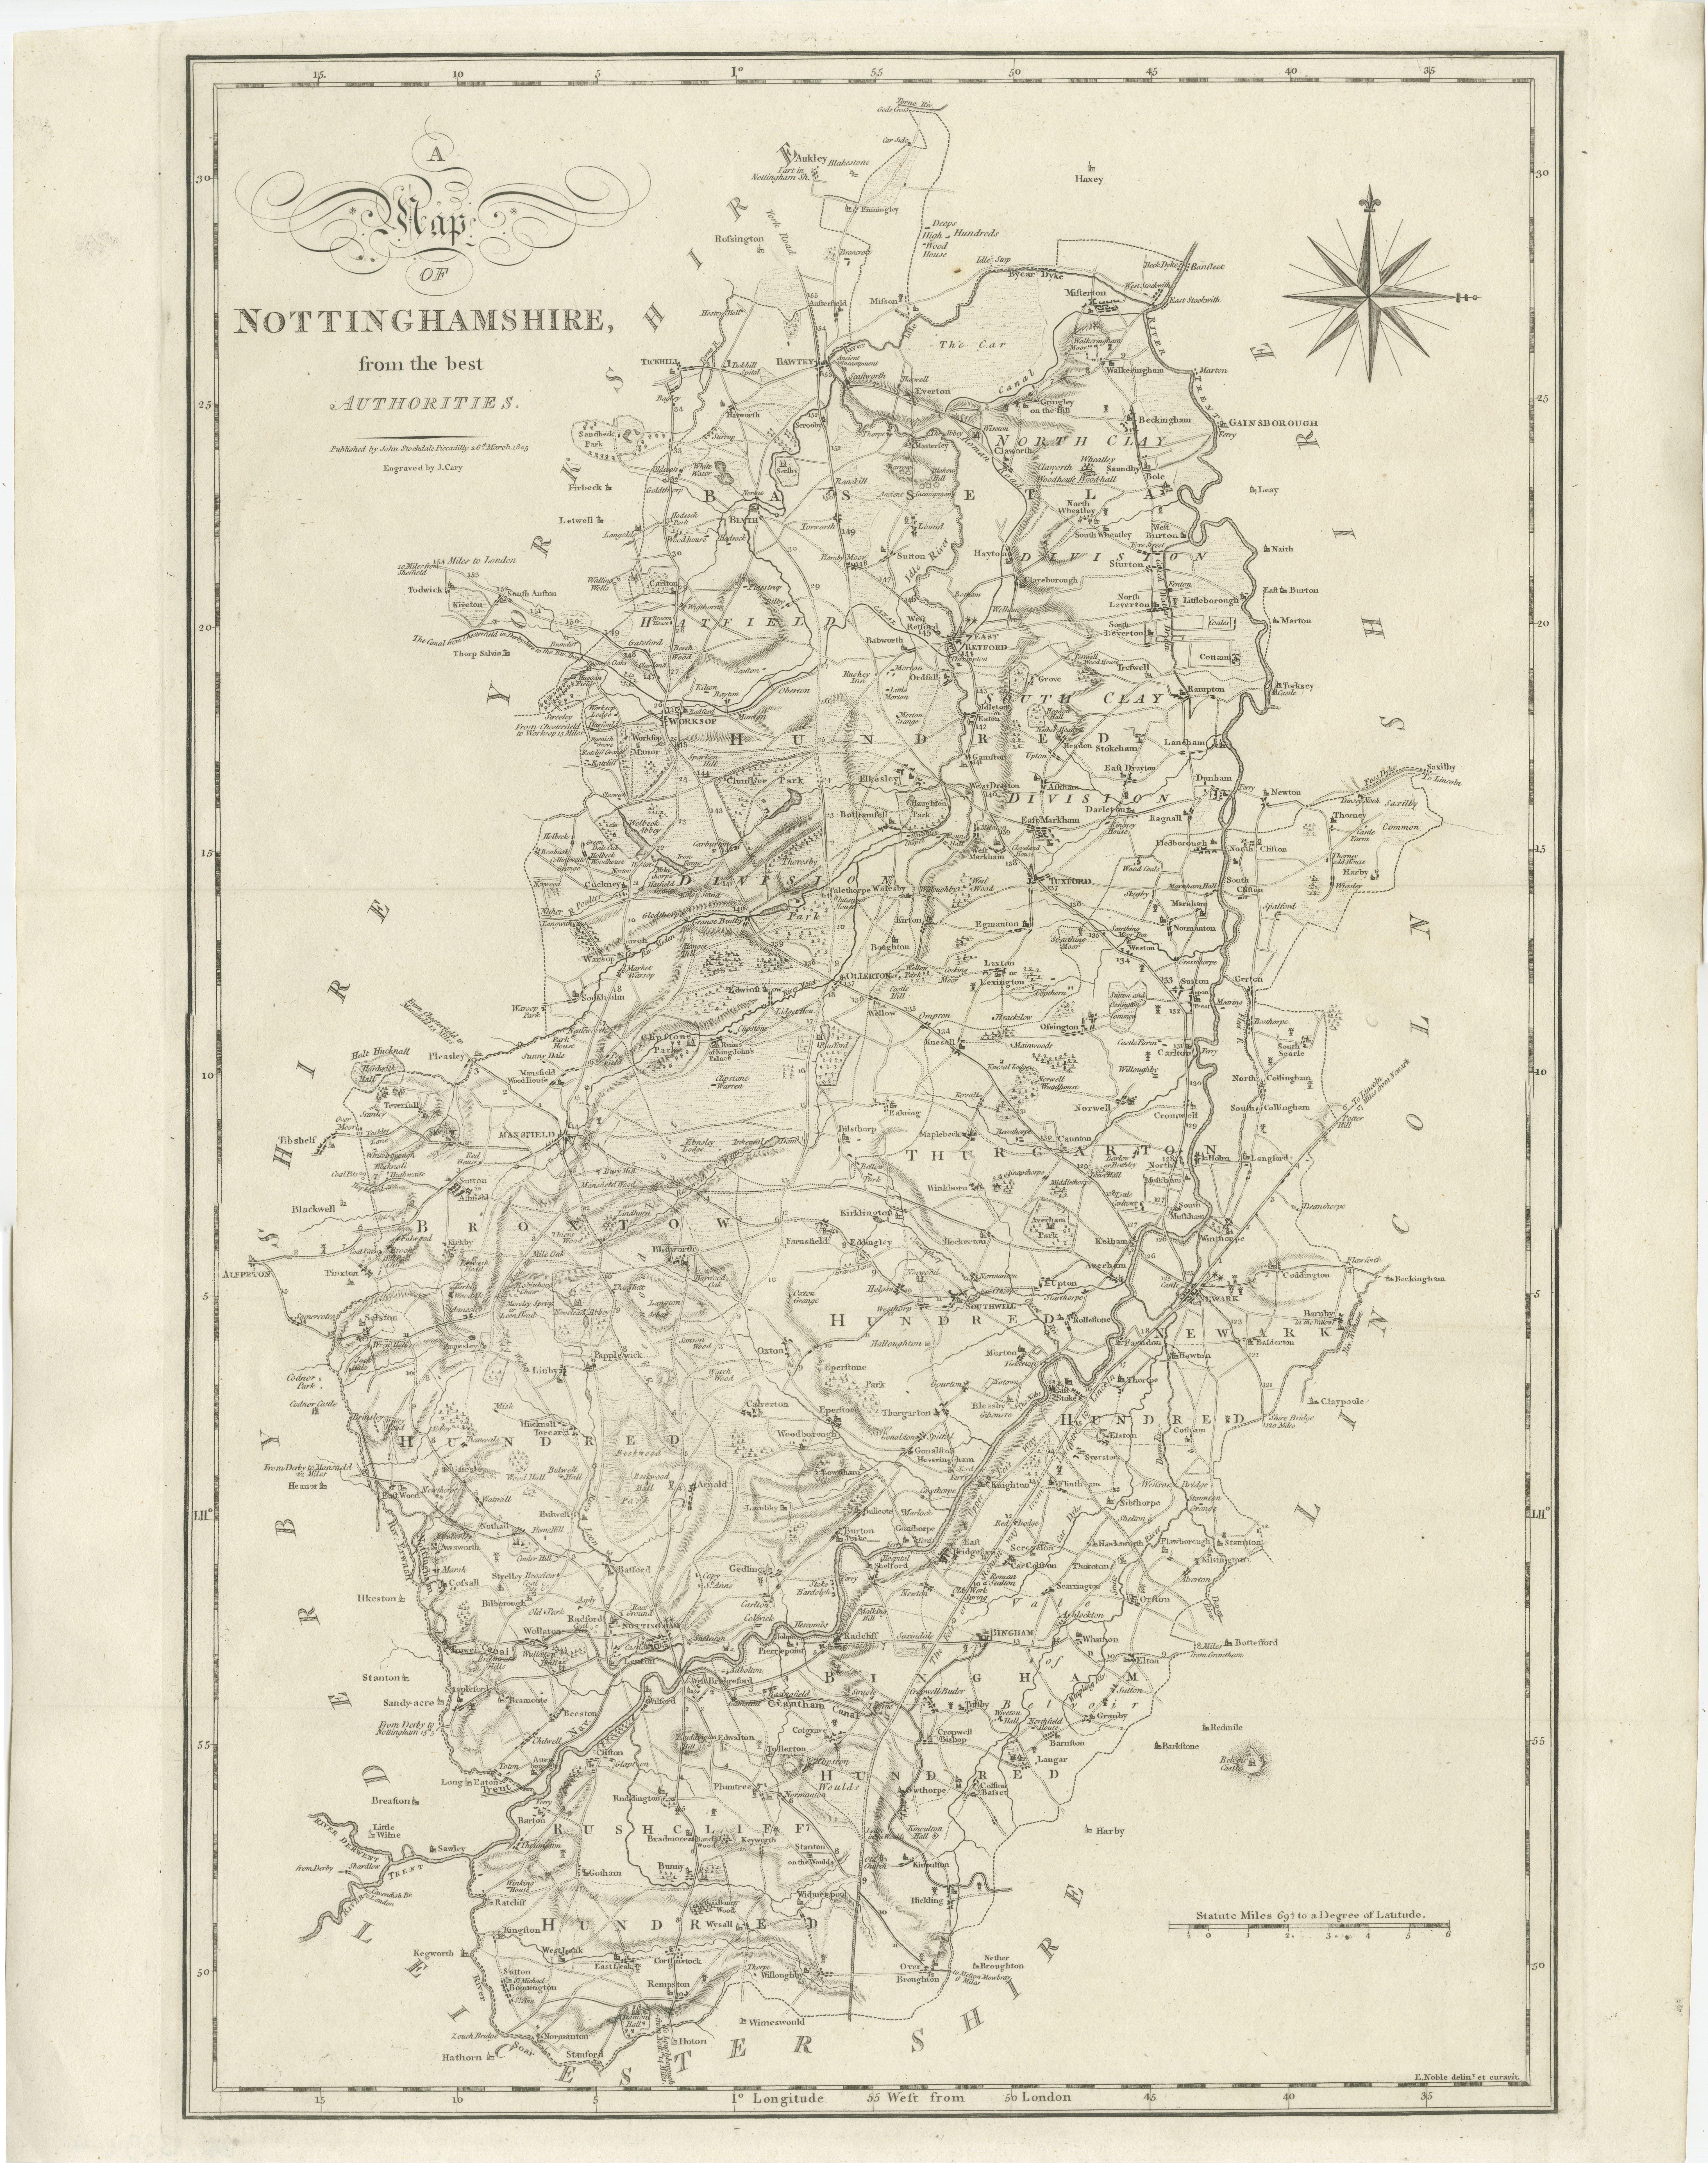 Paper Large Antique County Map of Nottinghamshire, England For Sale